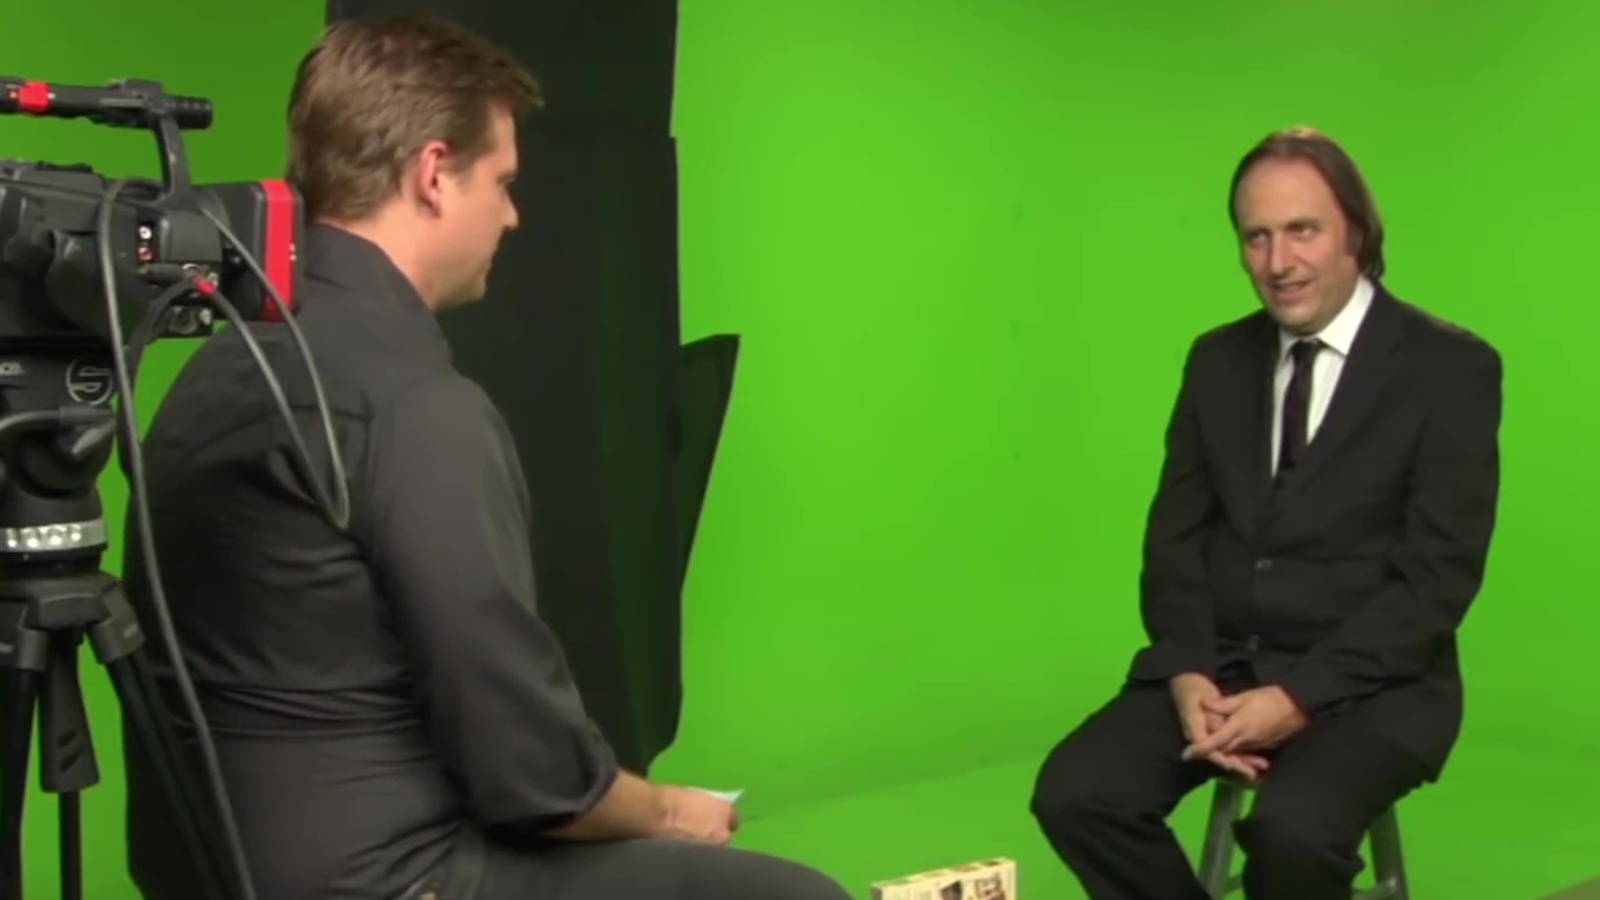 Two men sit on stools against a green-screen background